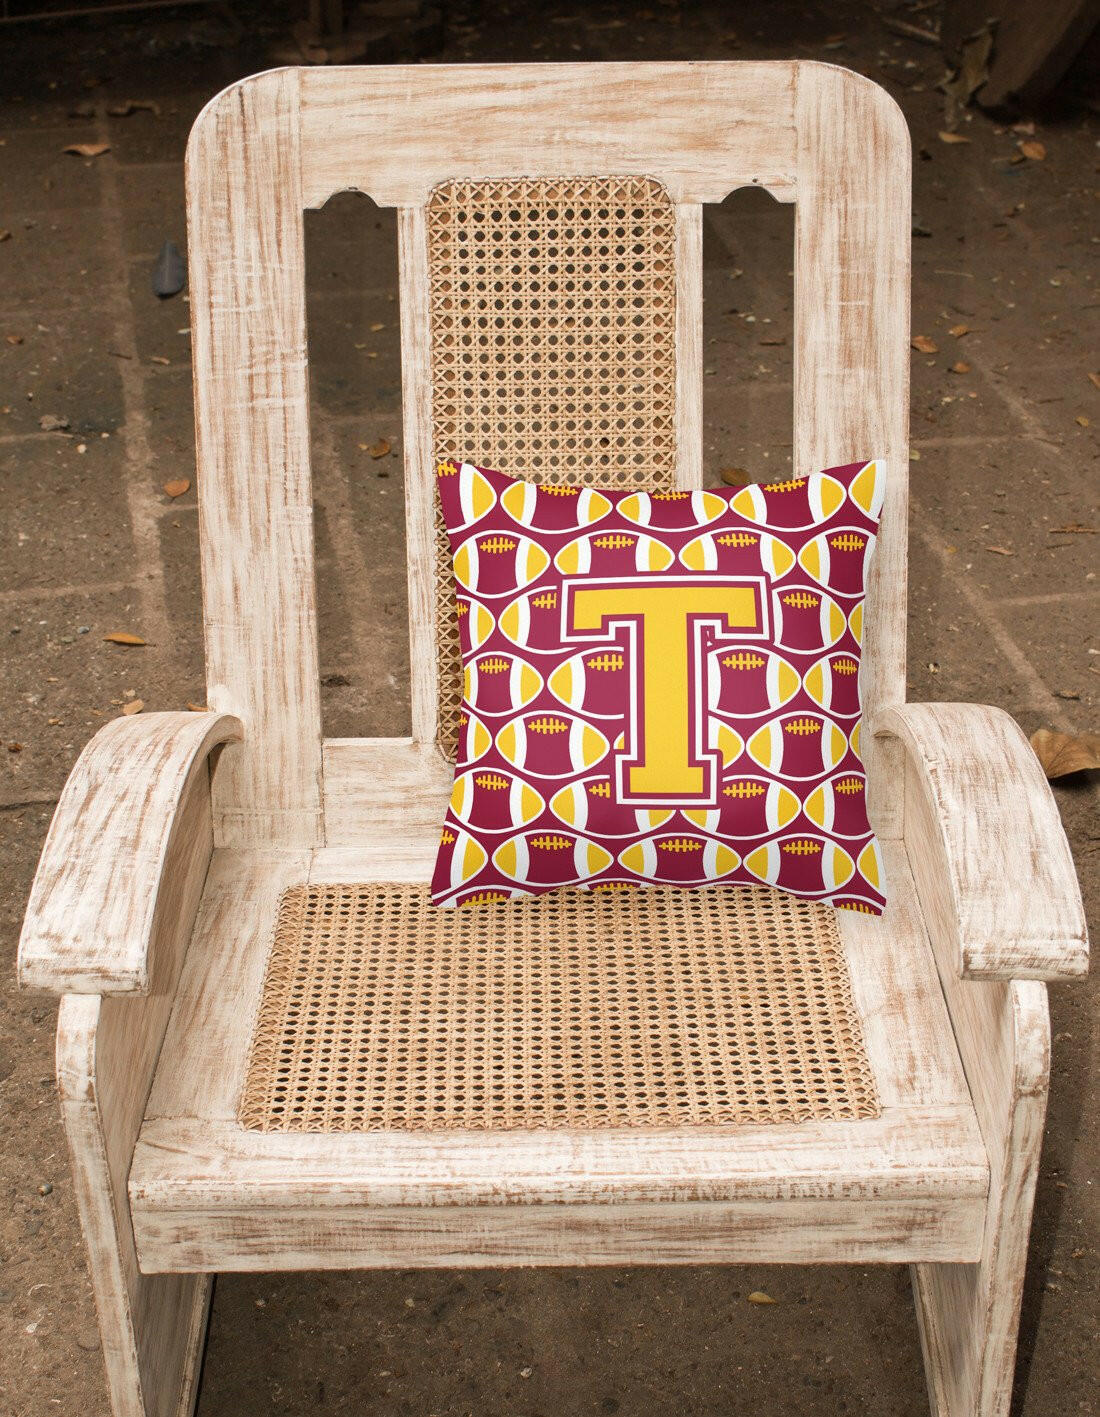 Letter T Football Maroon and Gold Fabric Decorative Pillow CJ1081-TPW1414 by Caroline's Treasures